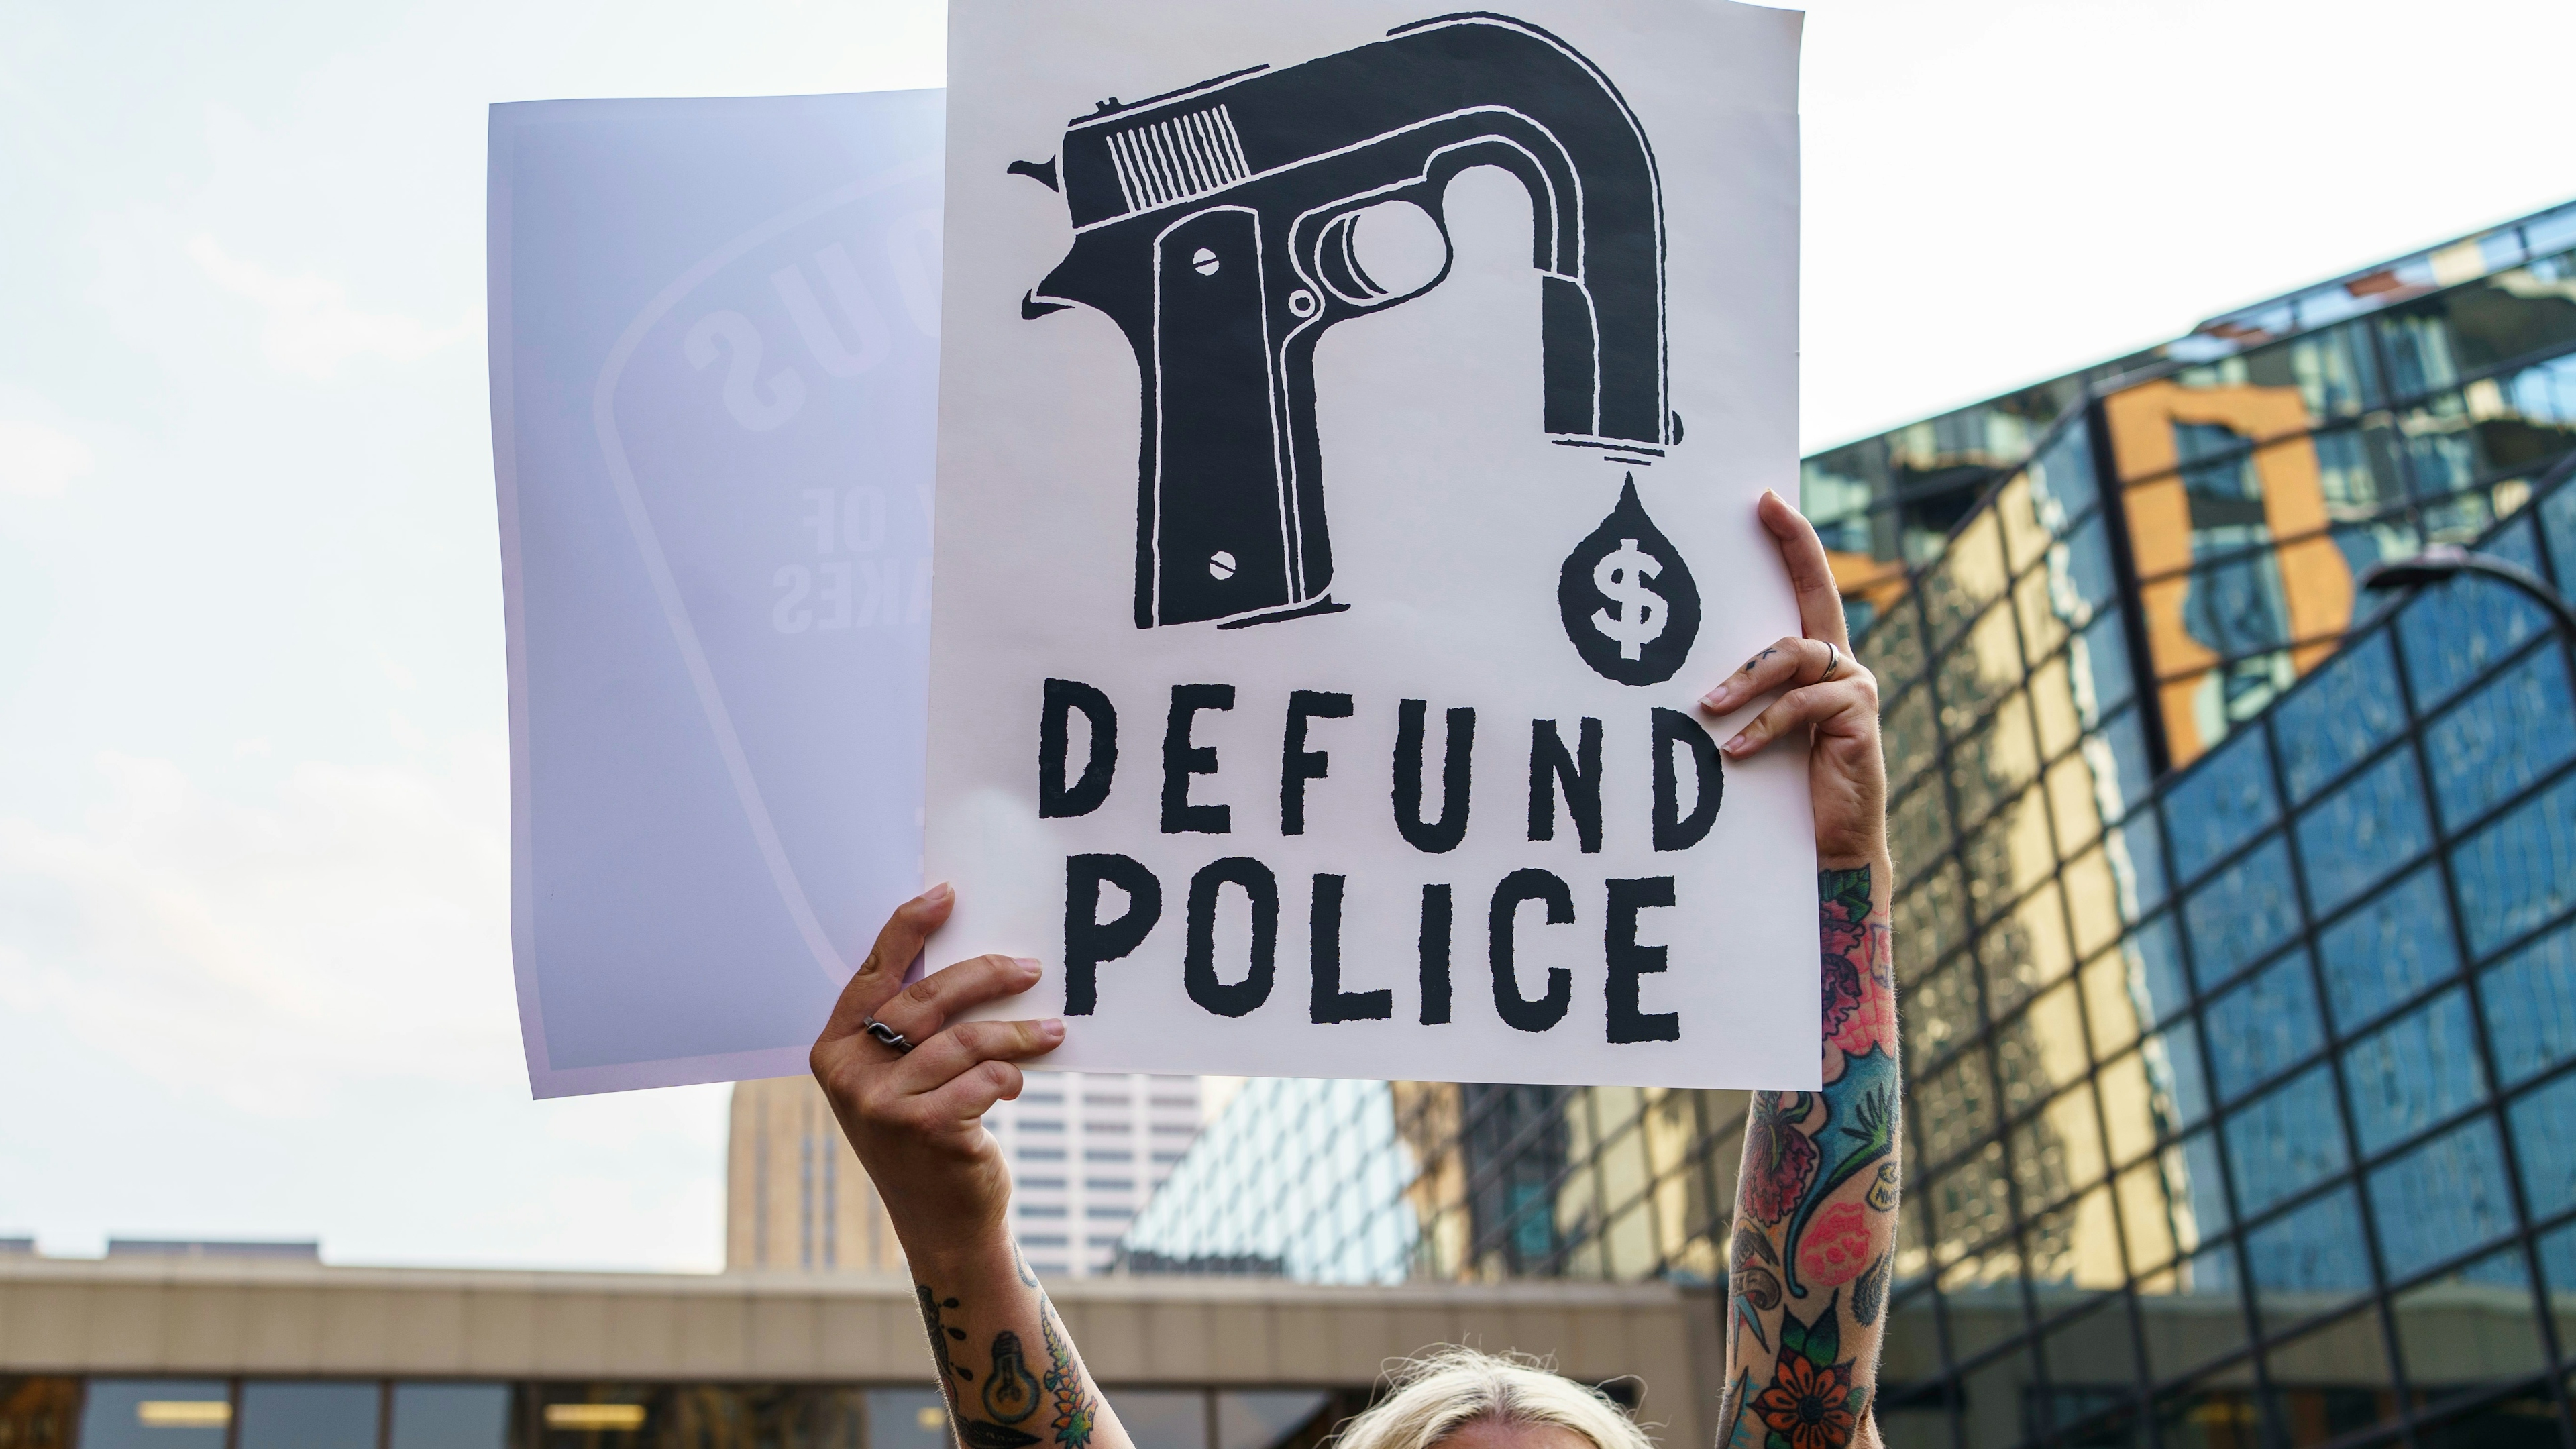 A protester hold a sign reading "Defund the Police" during a demonstration against police brutality and racism in Minneapolis, Minnesota.